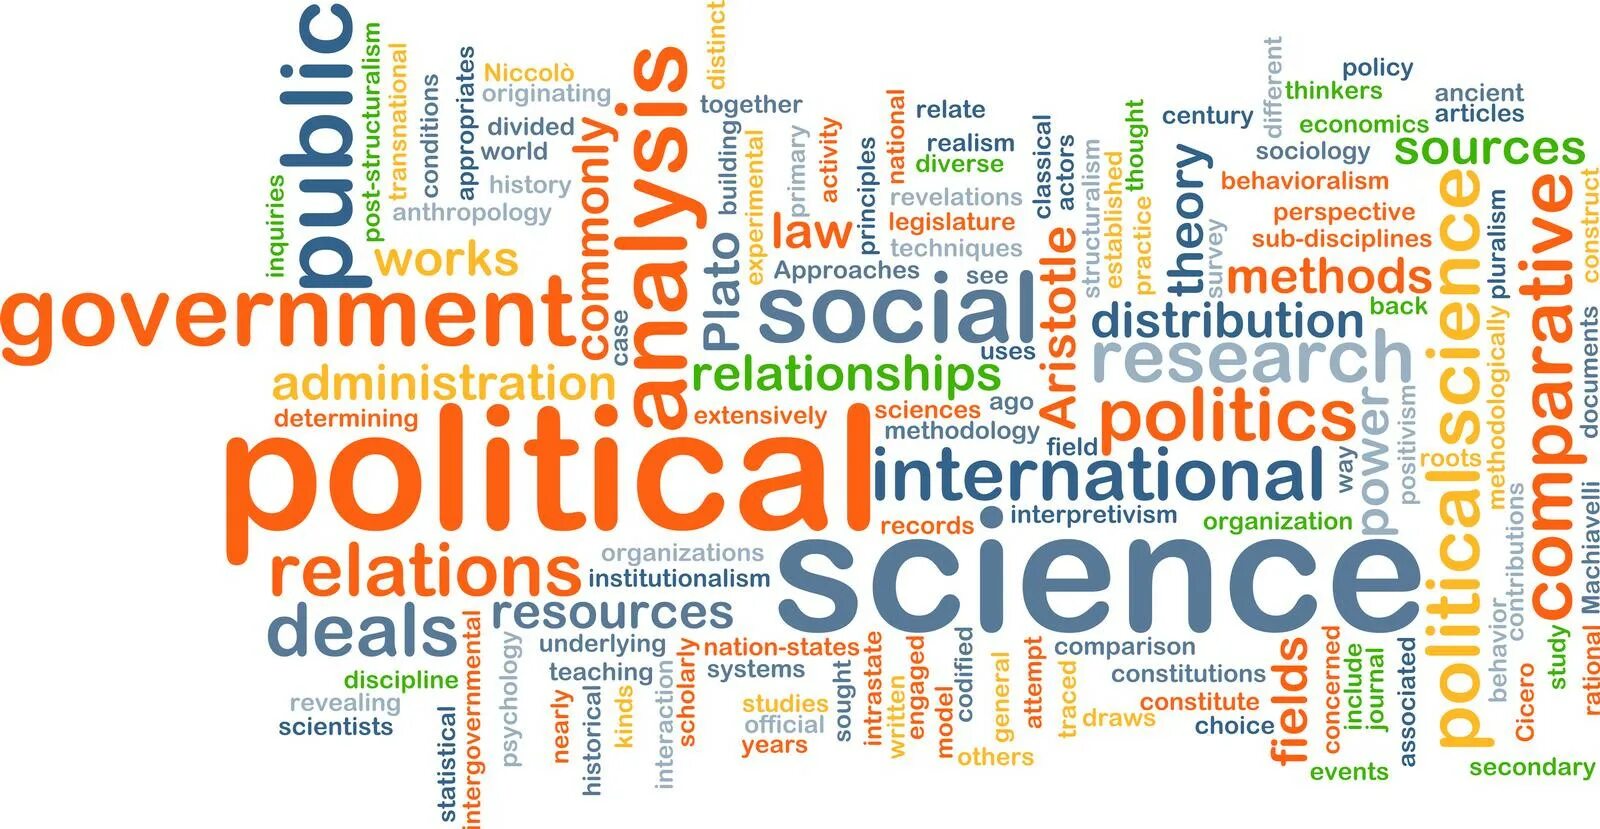 Government and society. Political Science. What is political Science. Government relations картинки. Government and Politics.